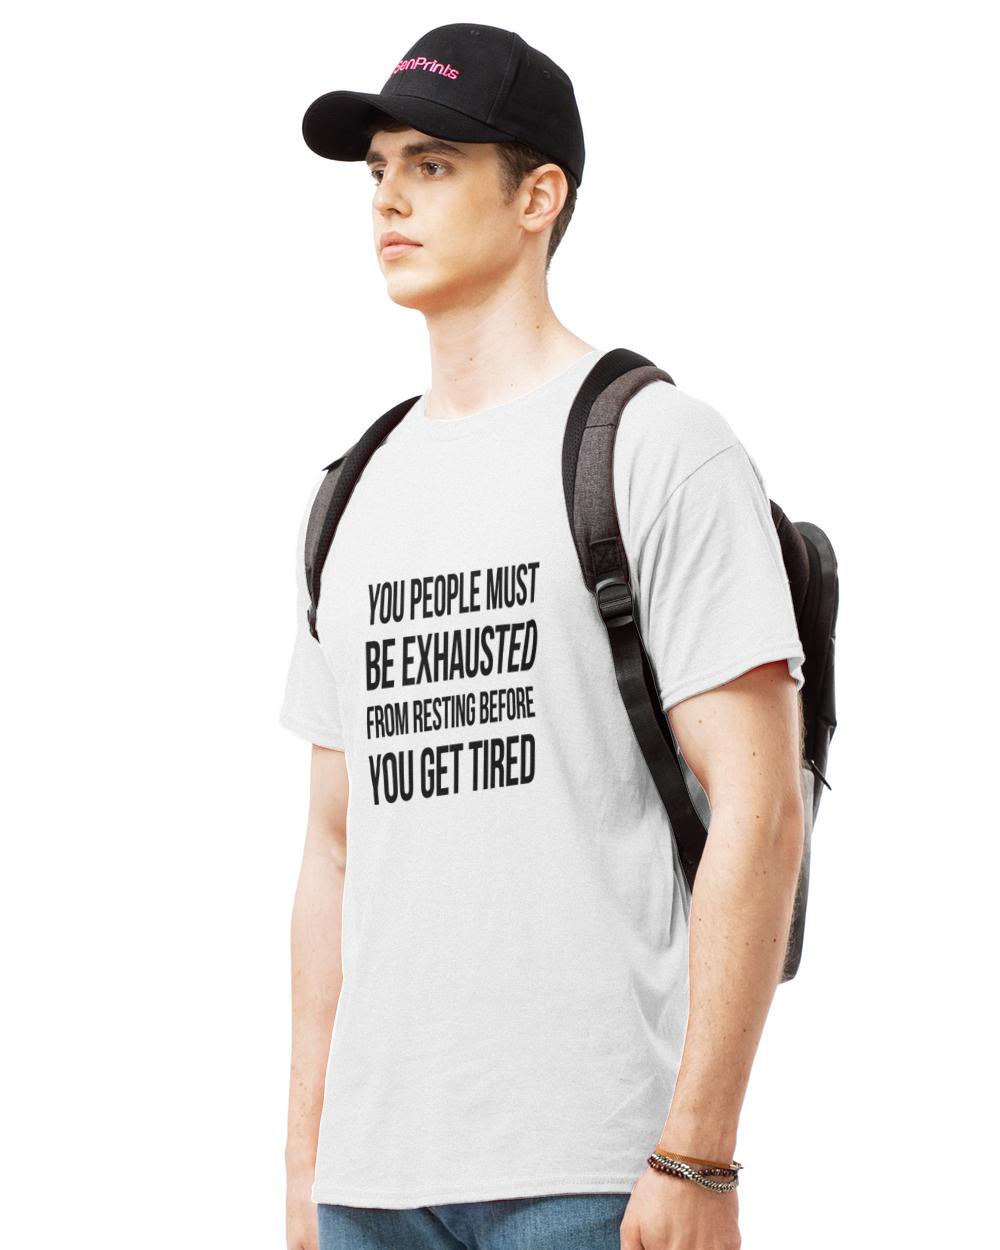 You people must be exhausted from resting before you get tired T-Shirt